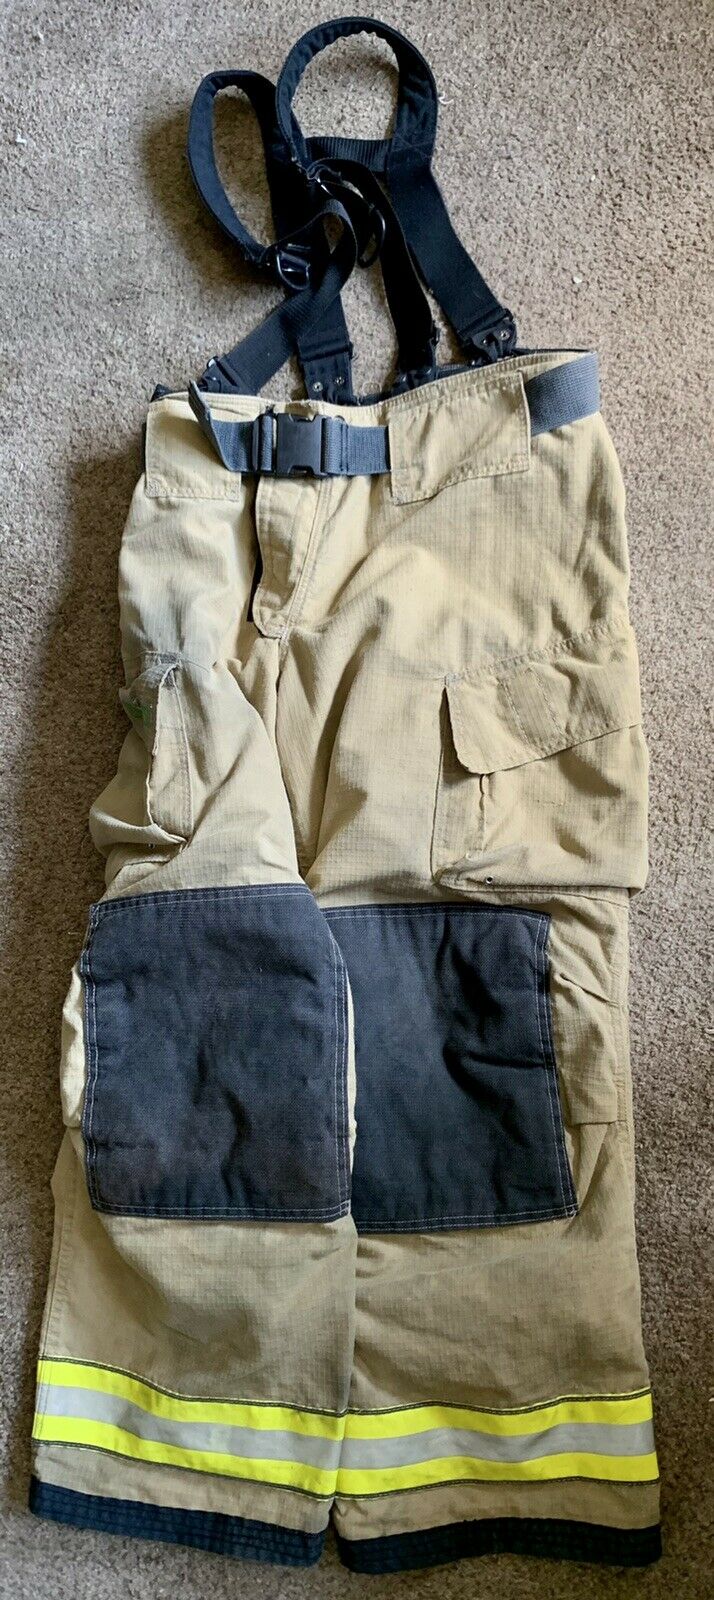 Cairns ReaXtion Turnout Bunker Pants 38 X 32 Used - Great Condition